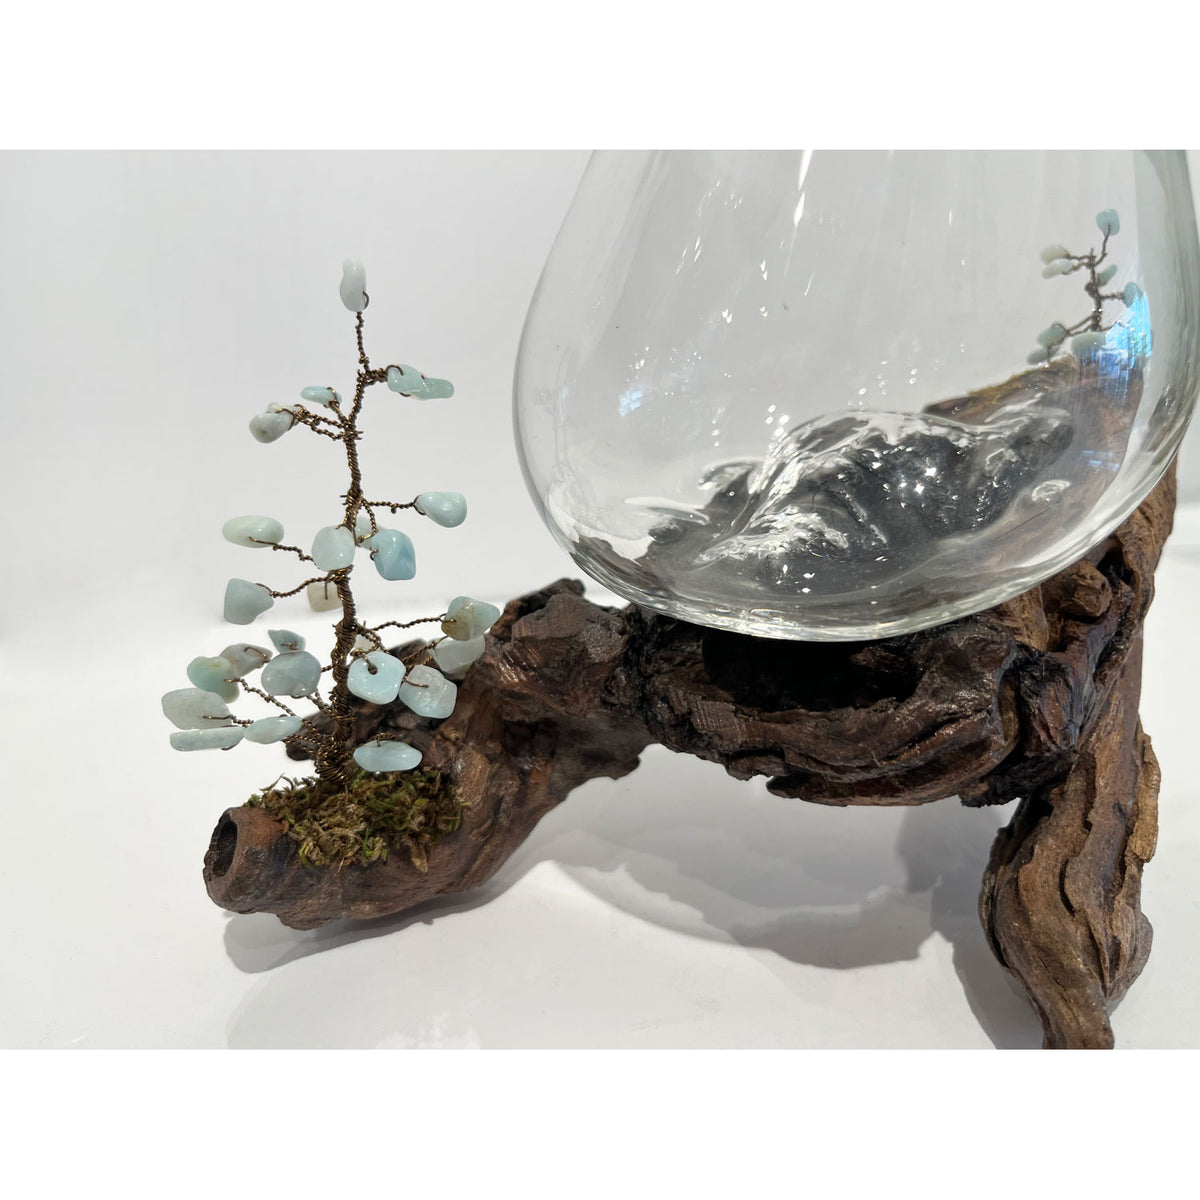 Michelle Bosveld - Driftwood Bowl with Trees, 6" x 7.5" x 4"